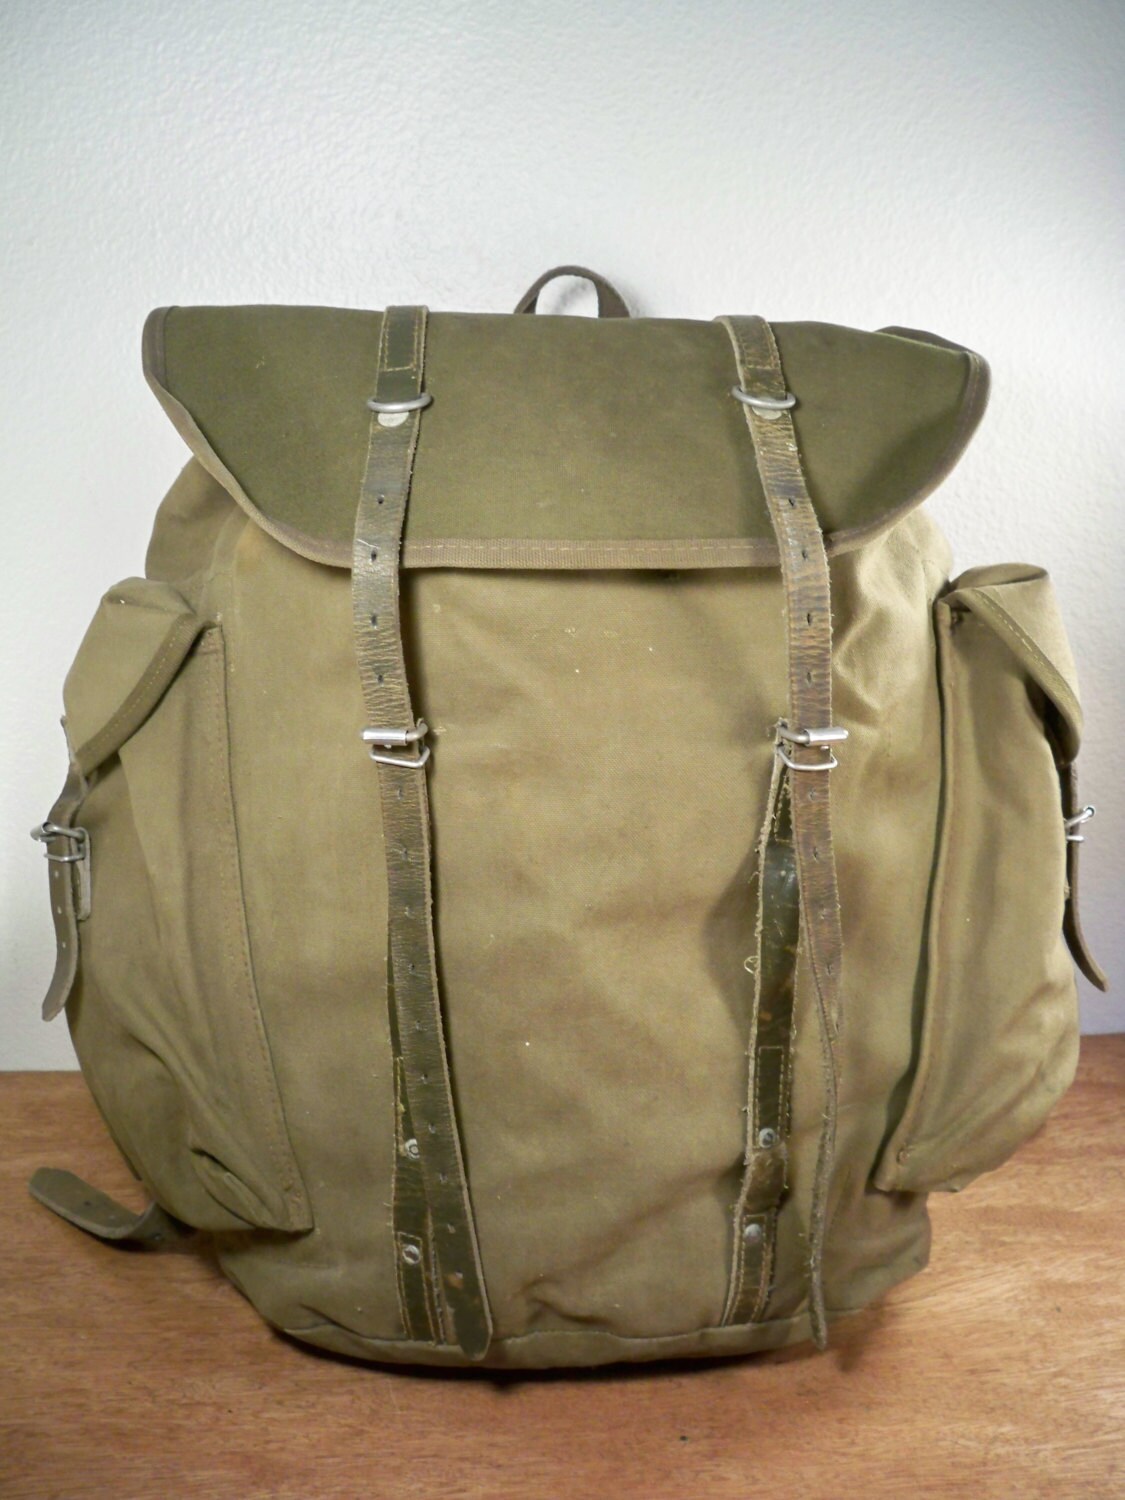 Vintage Made in USA Canvas & Leather Rucksack Backpack by Tyjahn